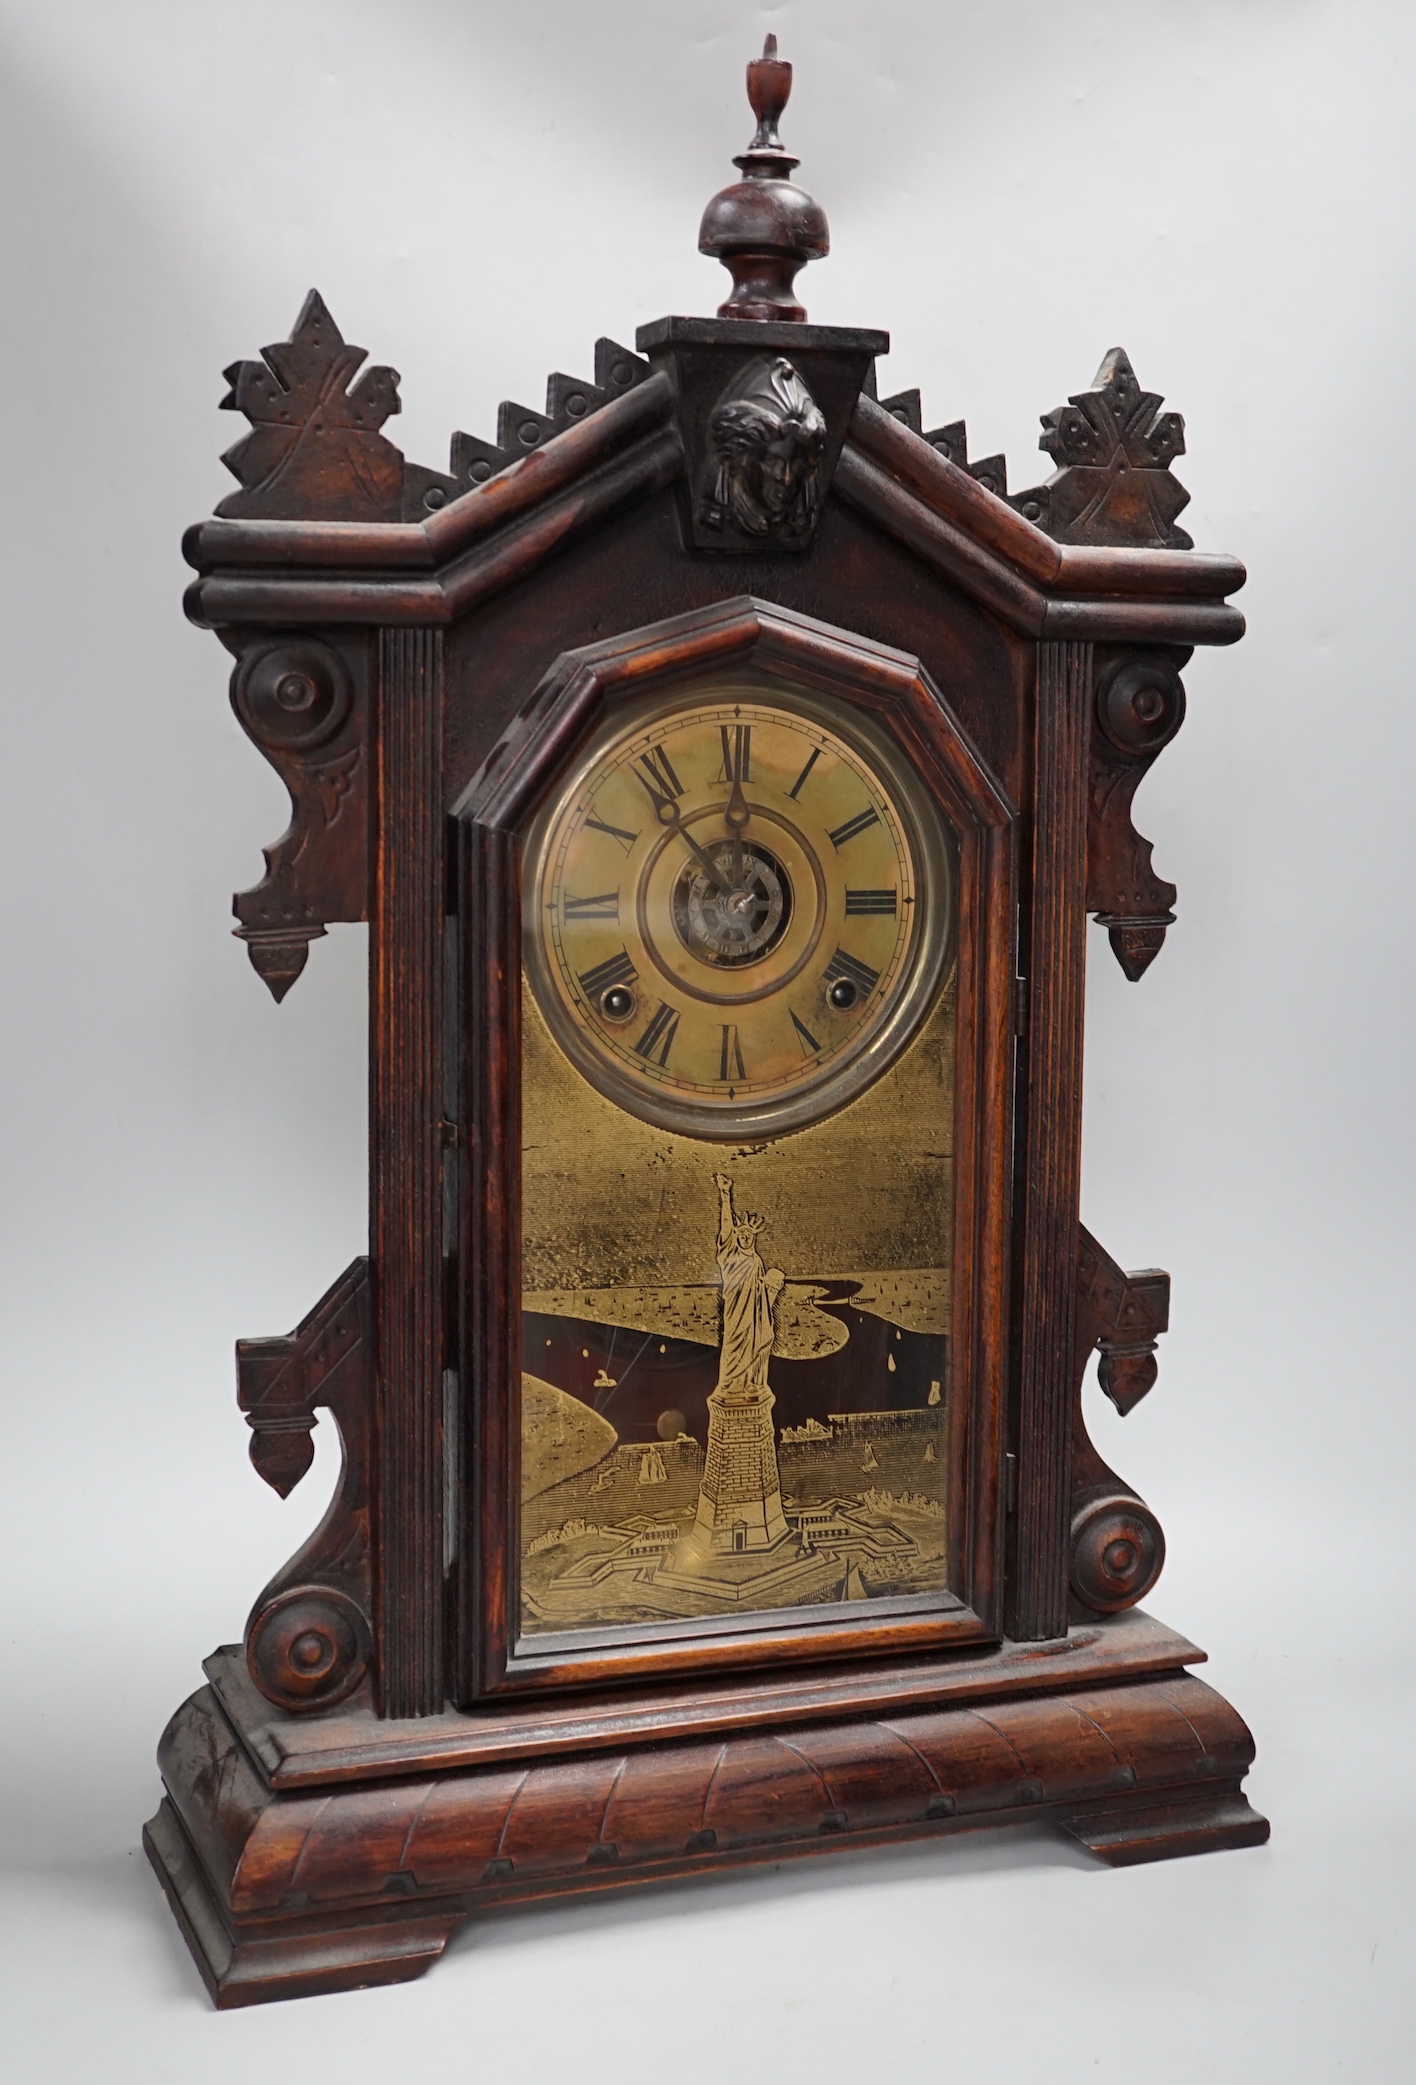 A 19th century American shelf clock, 60cm high, the glass decorated with the figure of the Statue of Liberty